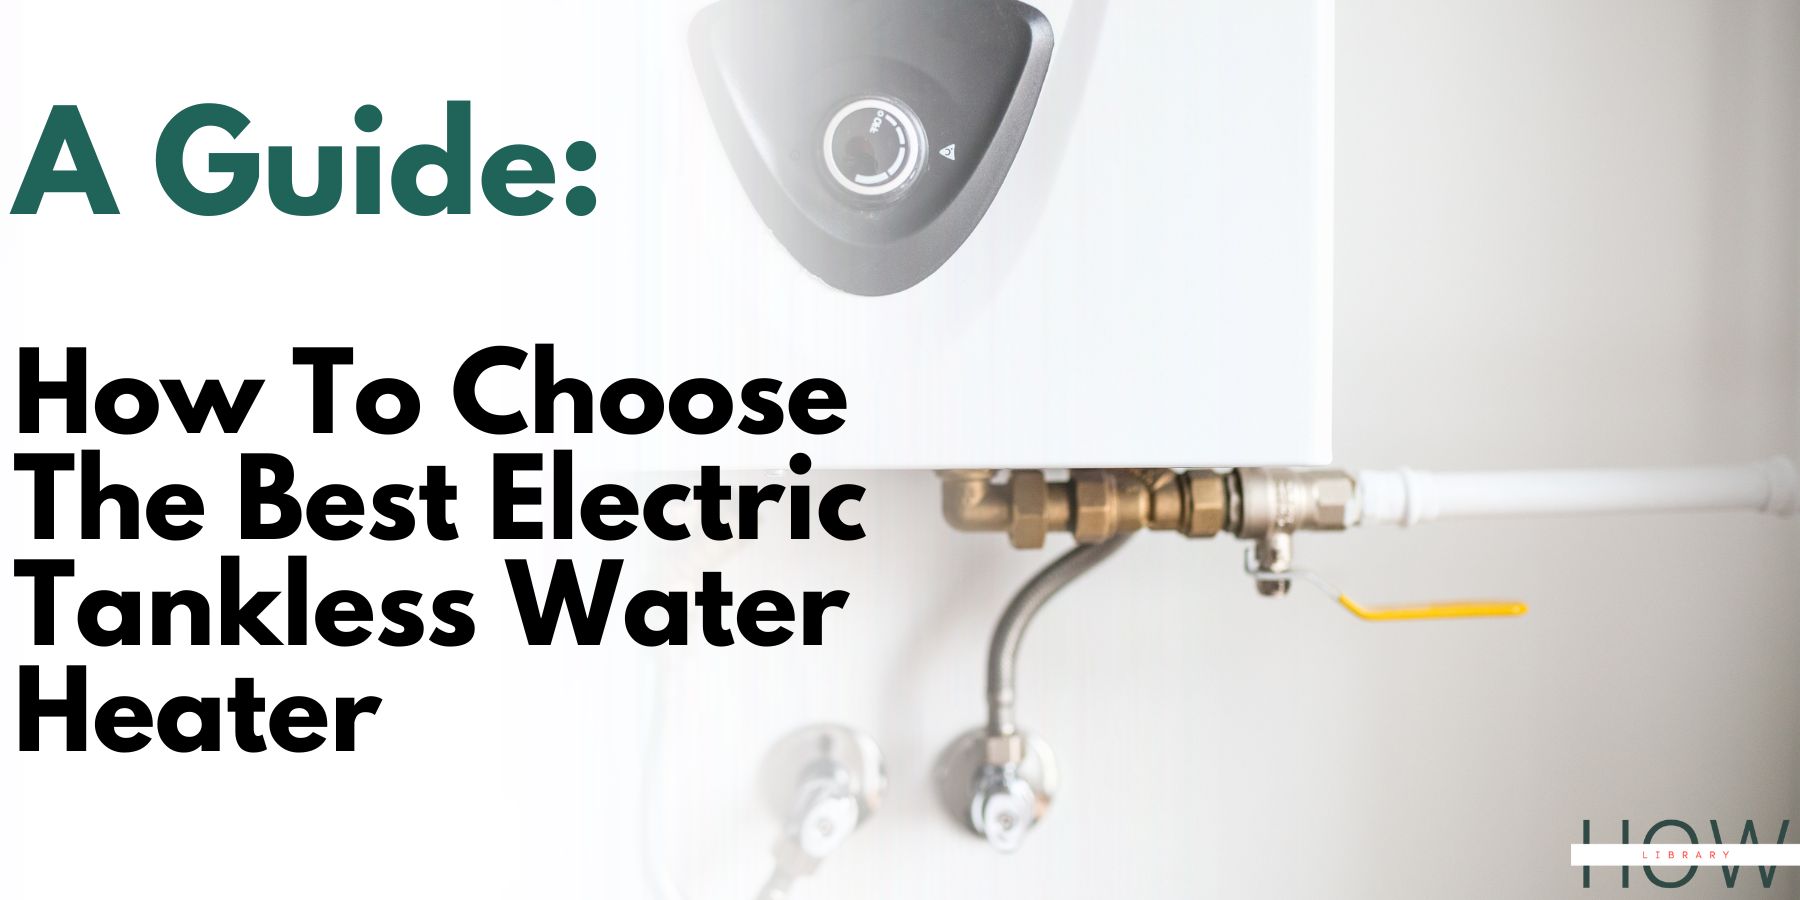 How To Choose The Best Electric Tankless Water Heater